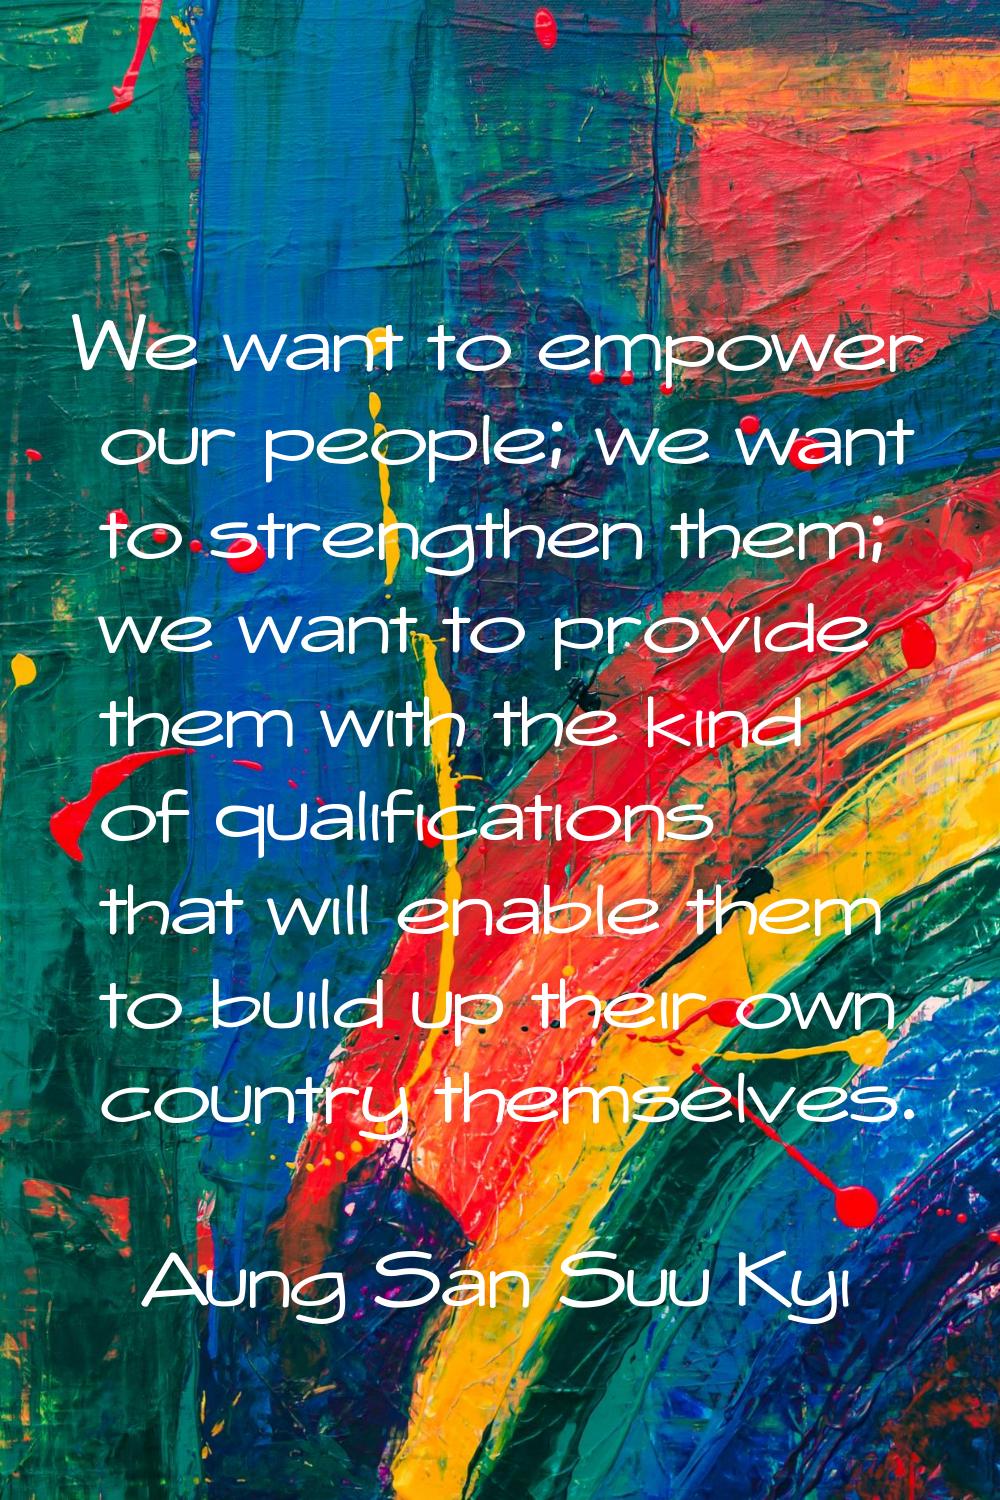 We want to empower our people; we want to strengthen them; we want to provide them with the kind of